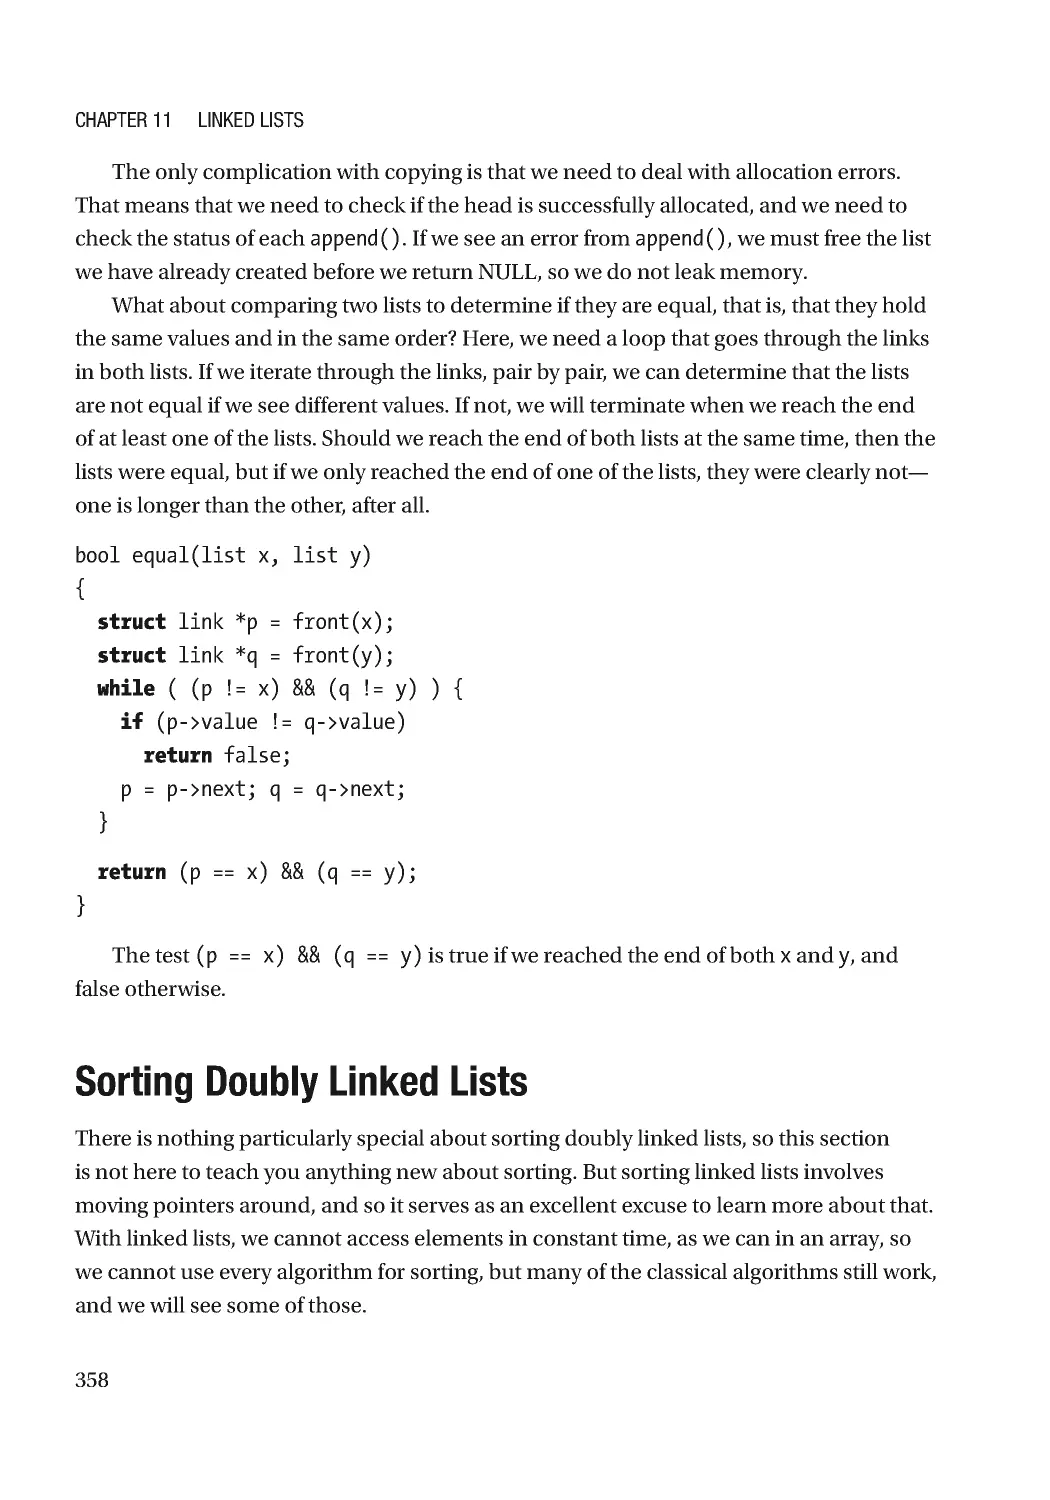 Sorting Doubly Linked Lists